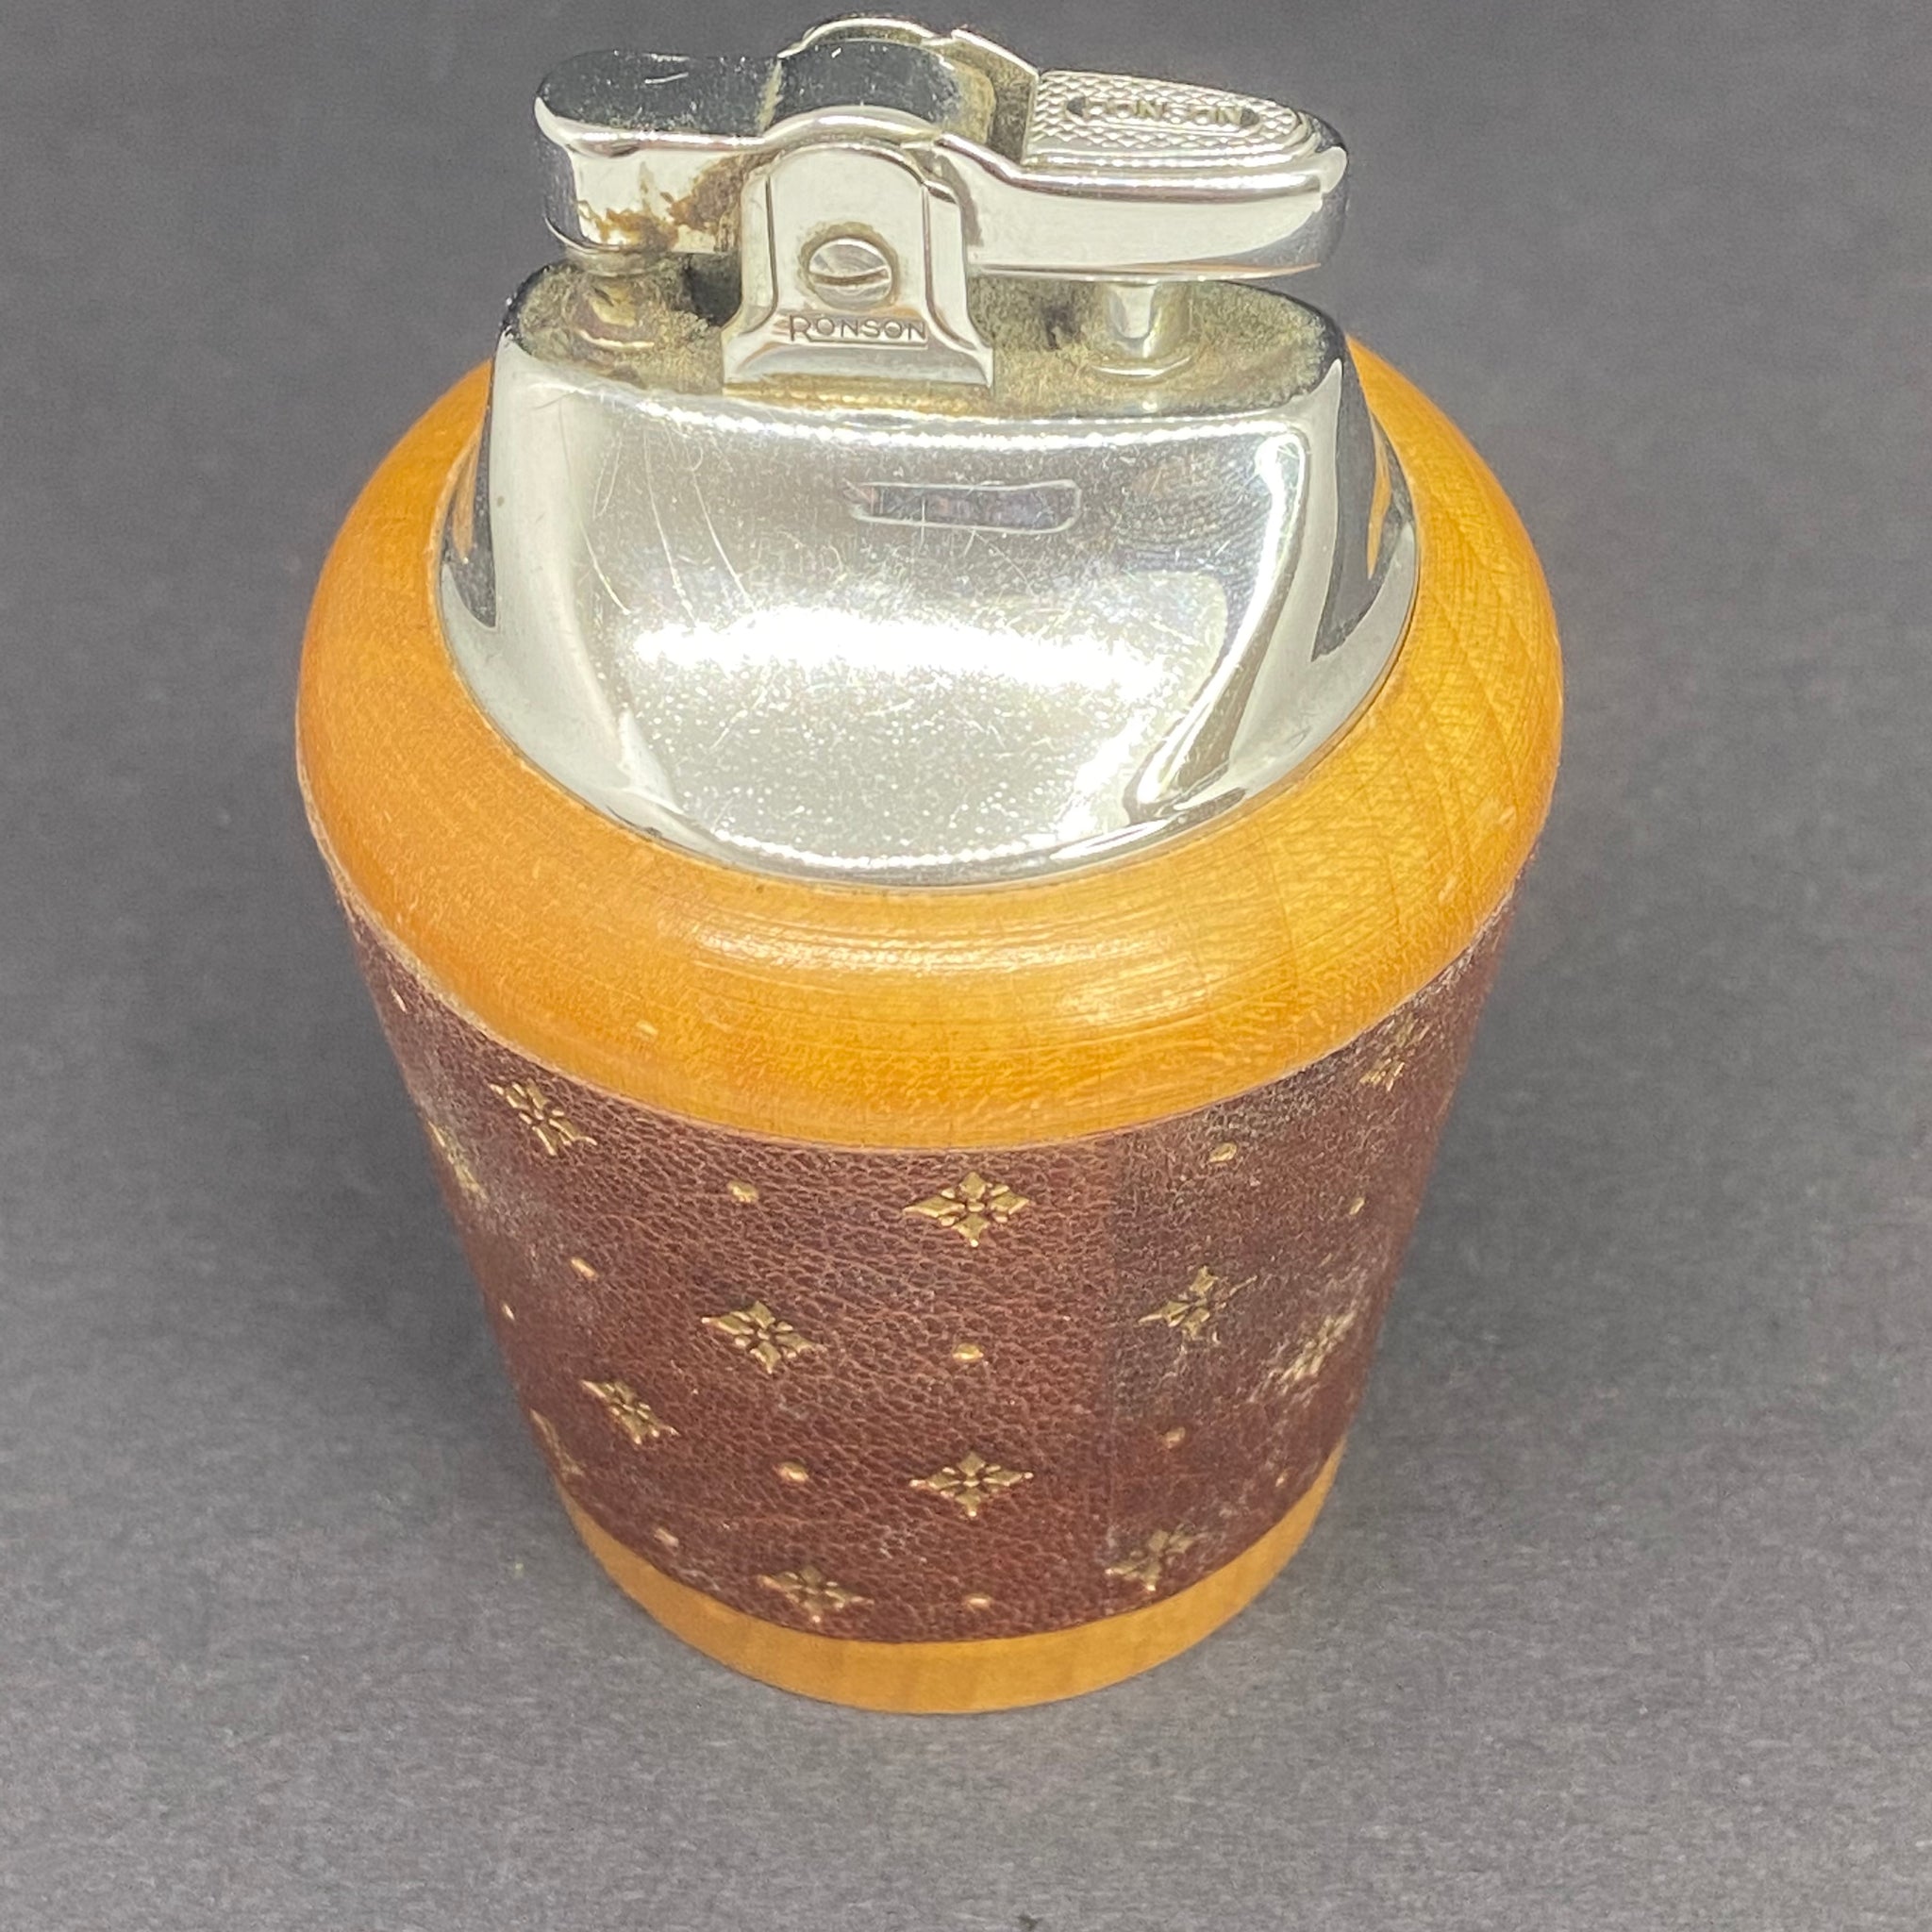 Louis Vuitton lighter case made from a vintage Louis